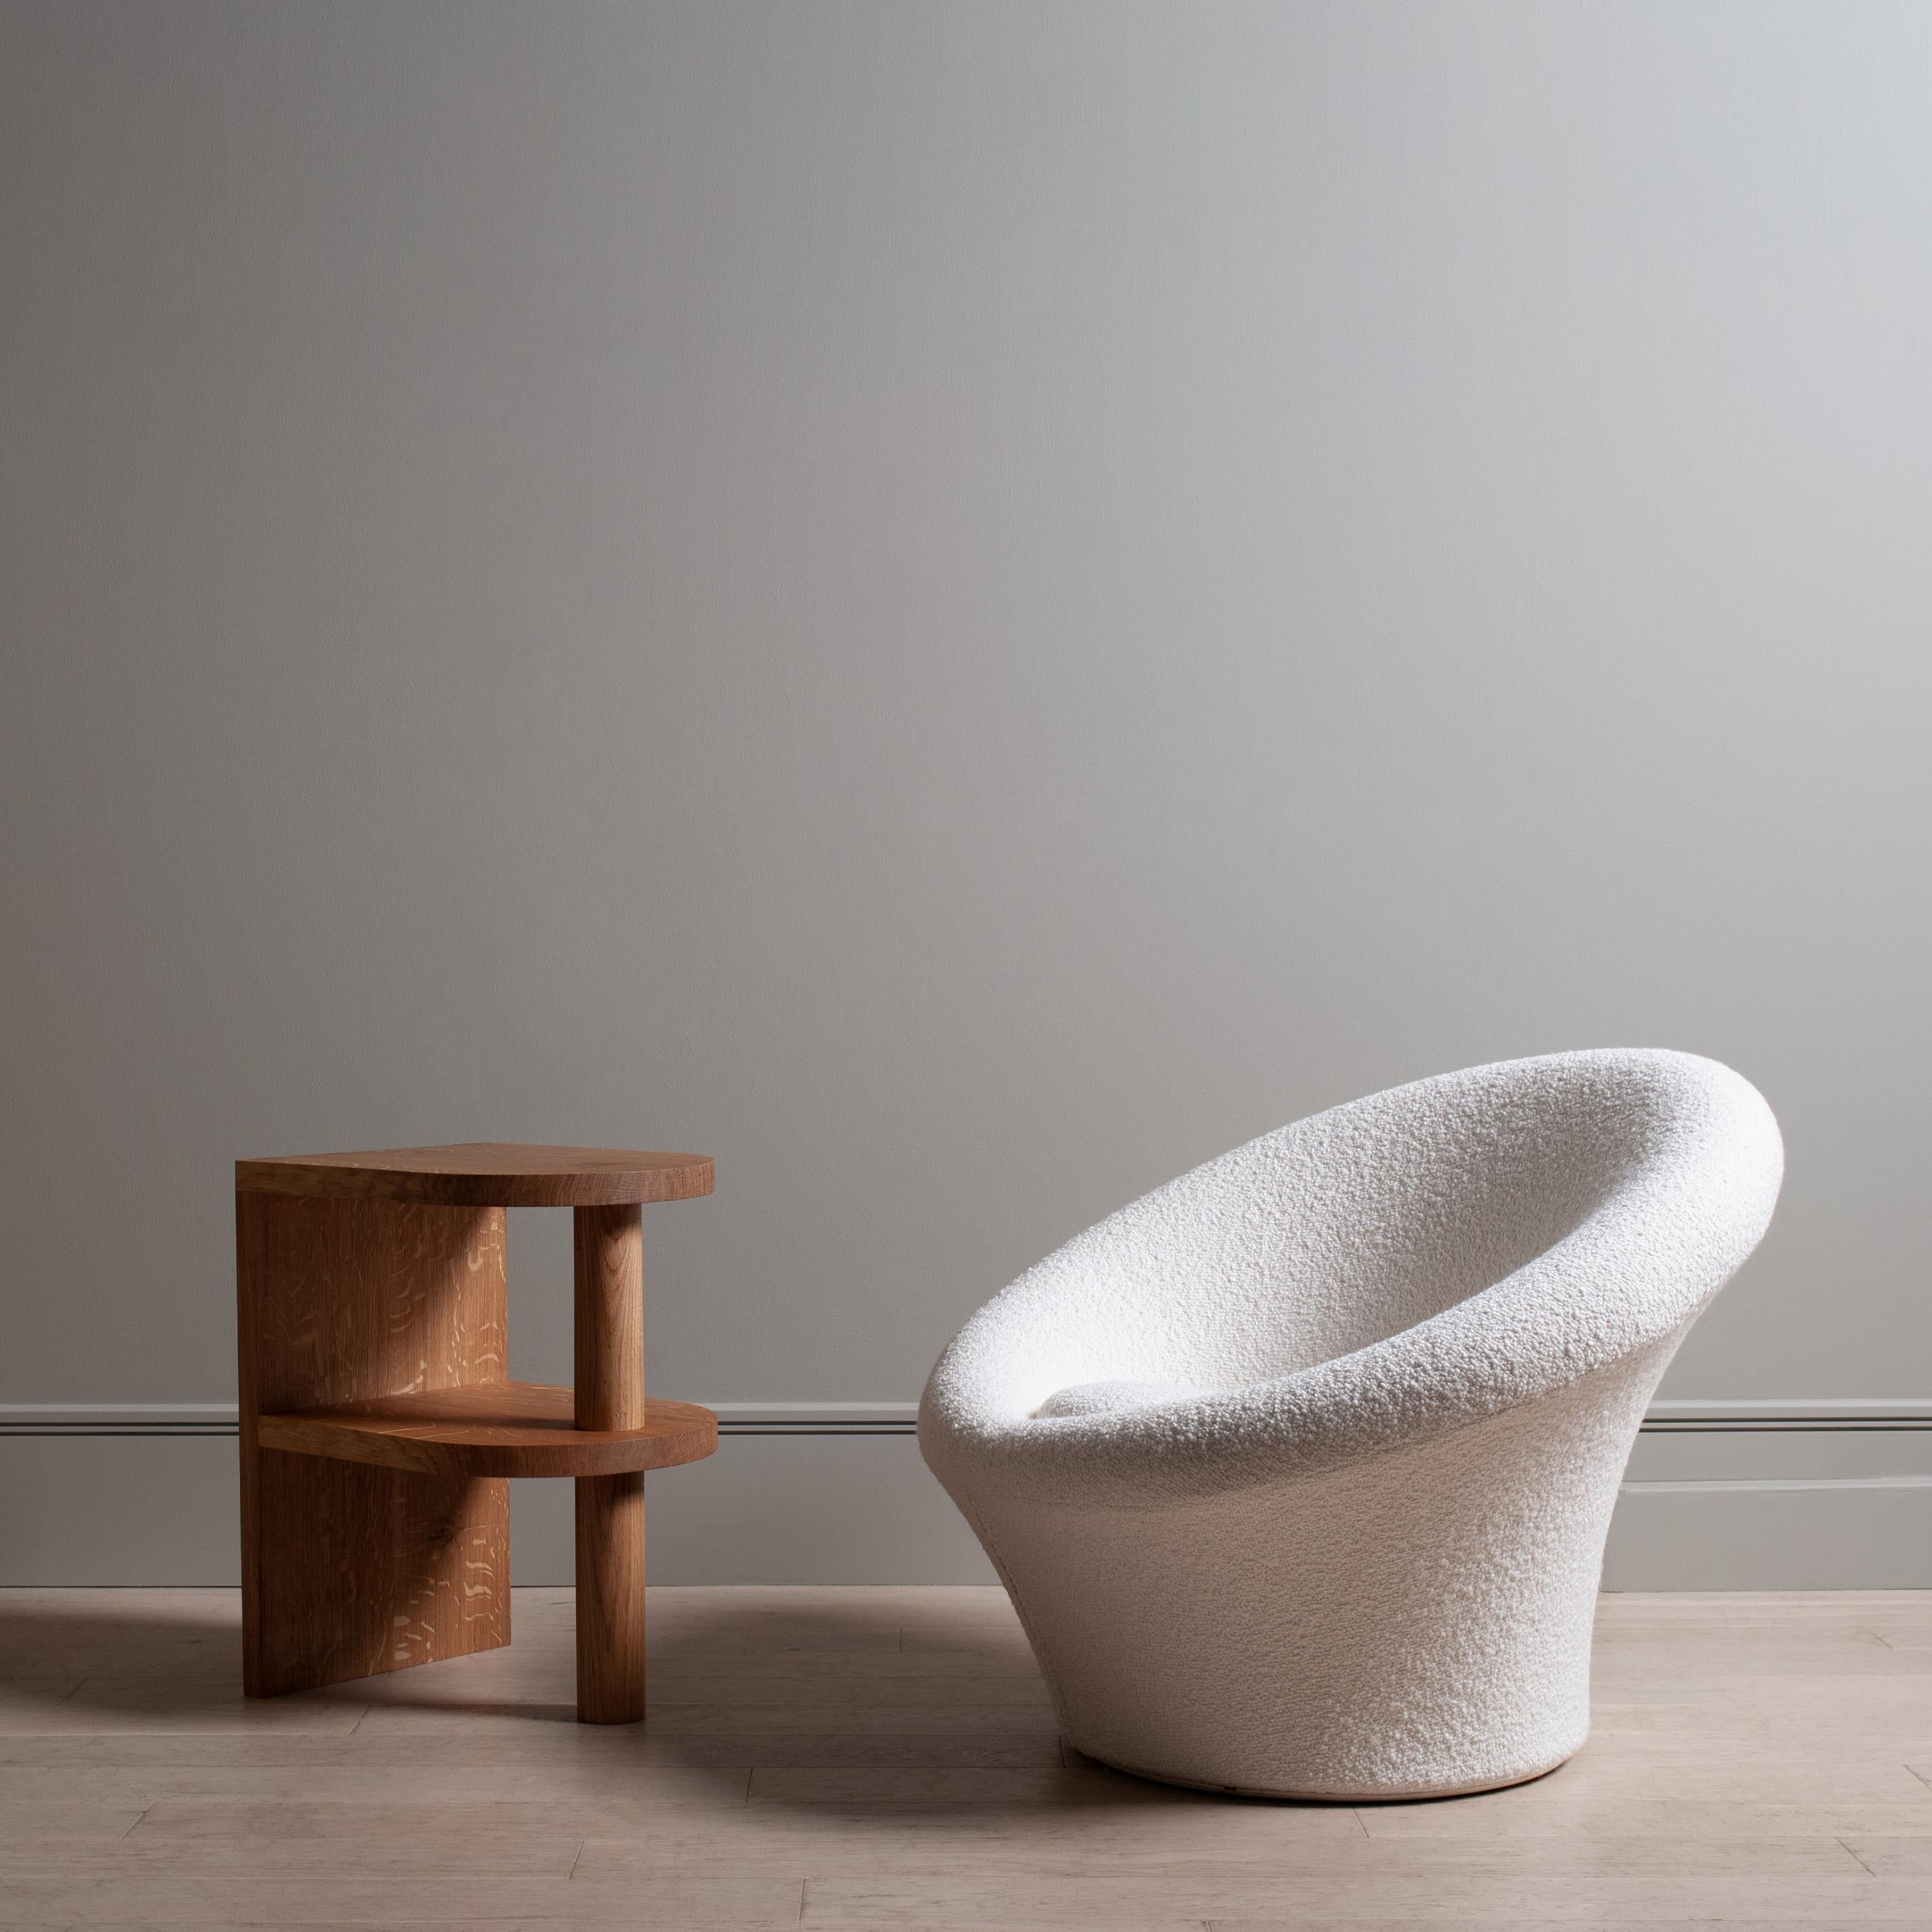 A fully reupholstered Pierre Paulin original Mushroom chair model f560 for Artifort, the Netherlands, circa 1960. 
Professionally reupholstered from the frame up with new foam and covered in Dedar Karakorum 001 ivory boucle wool viscose fabric.
We